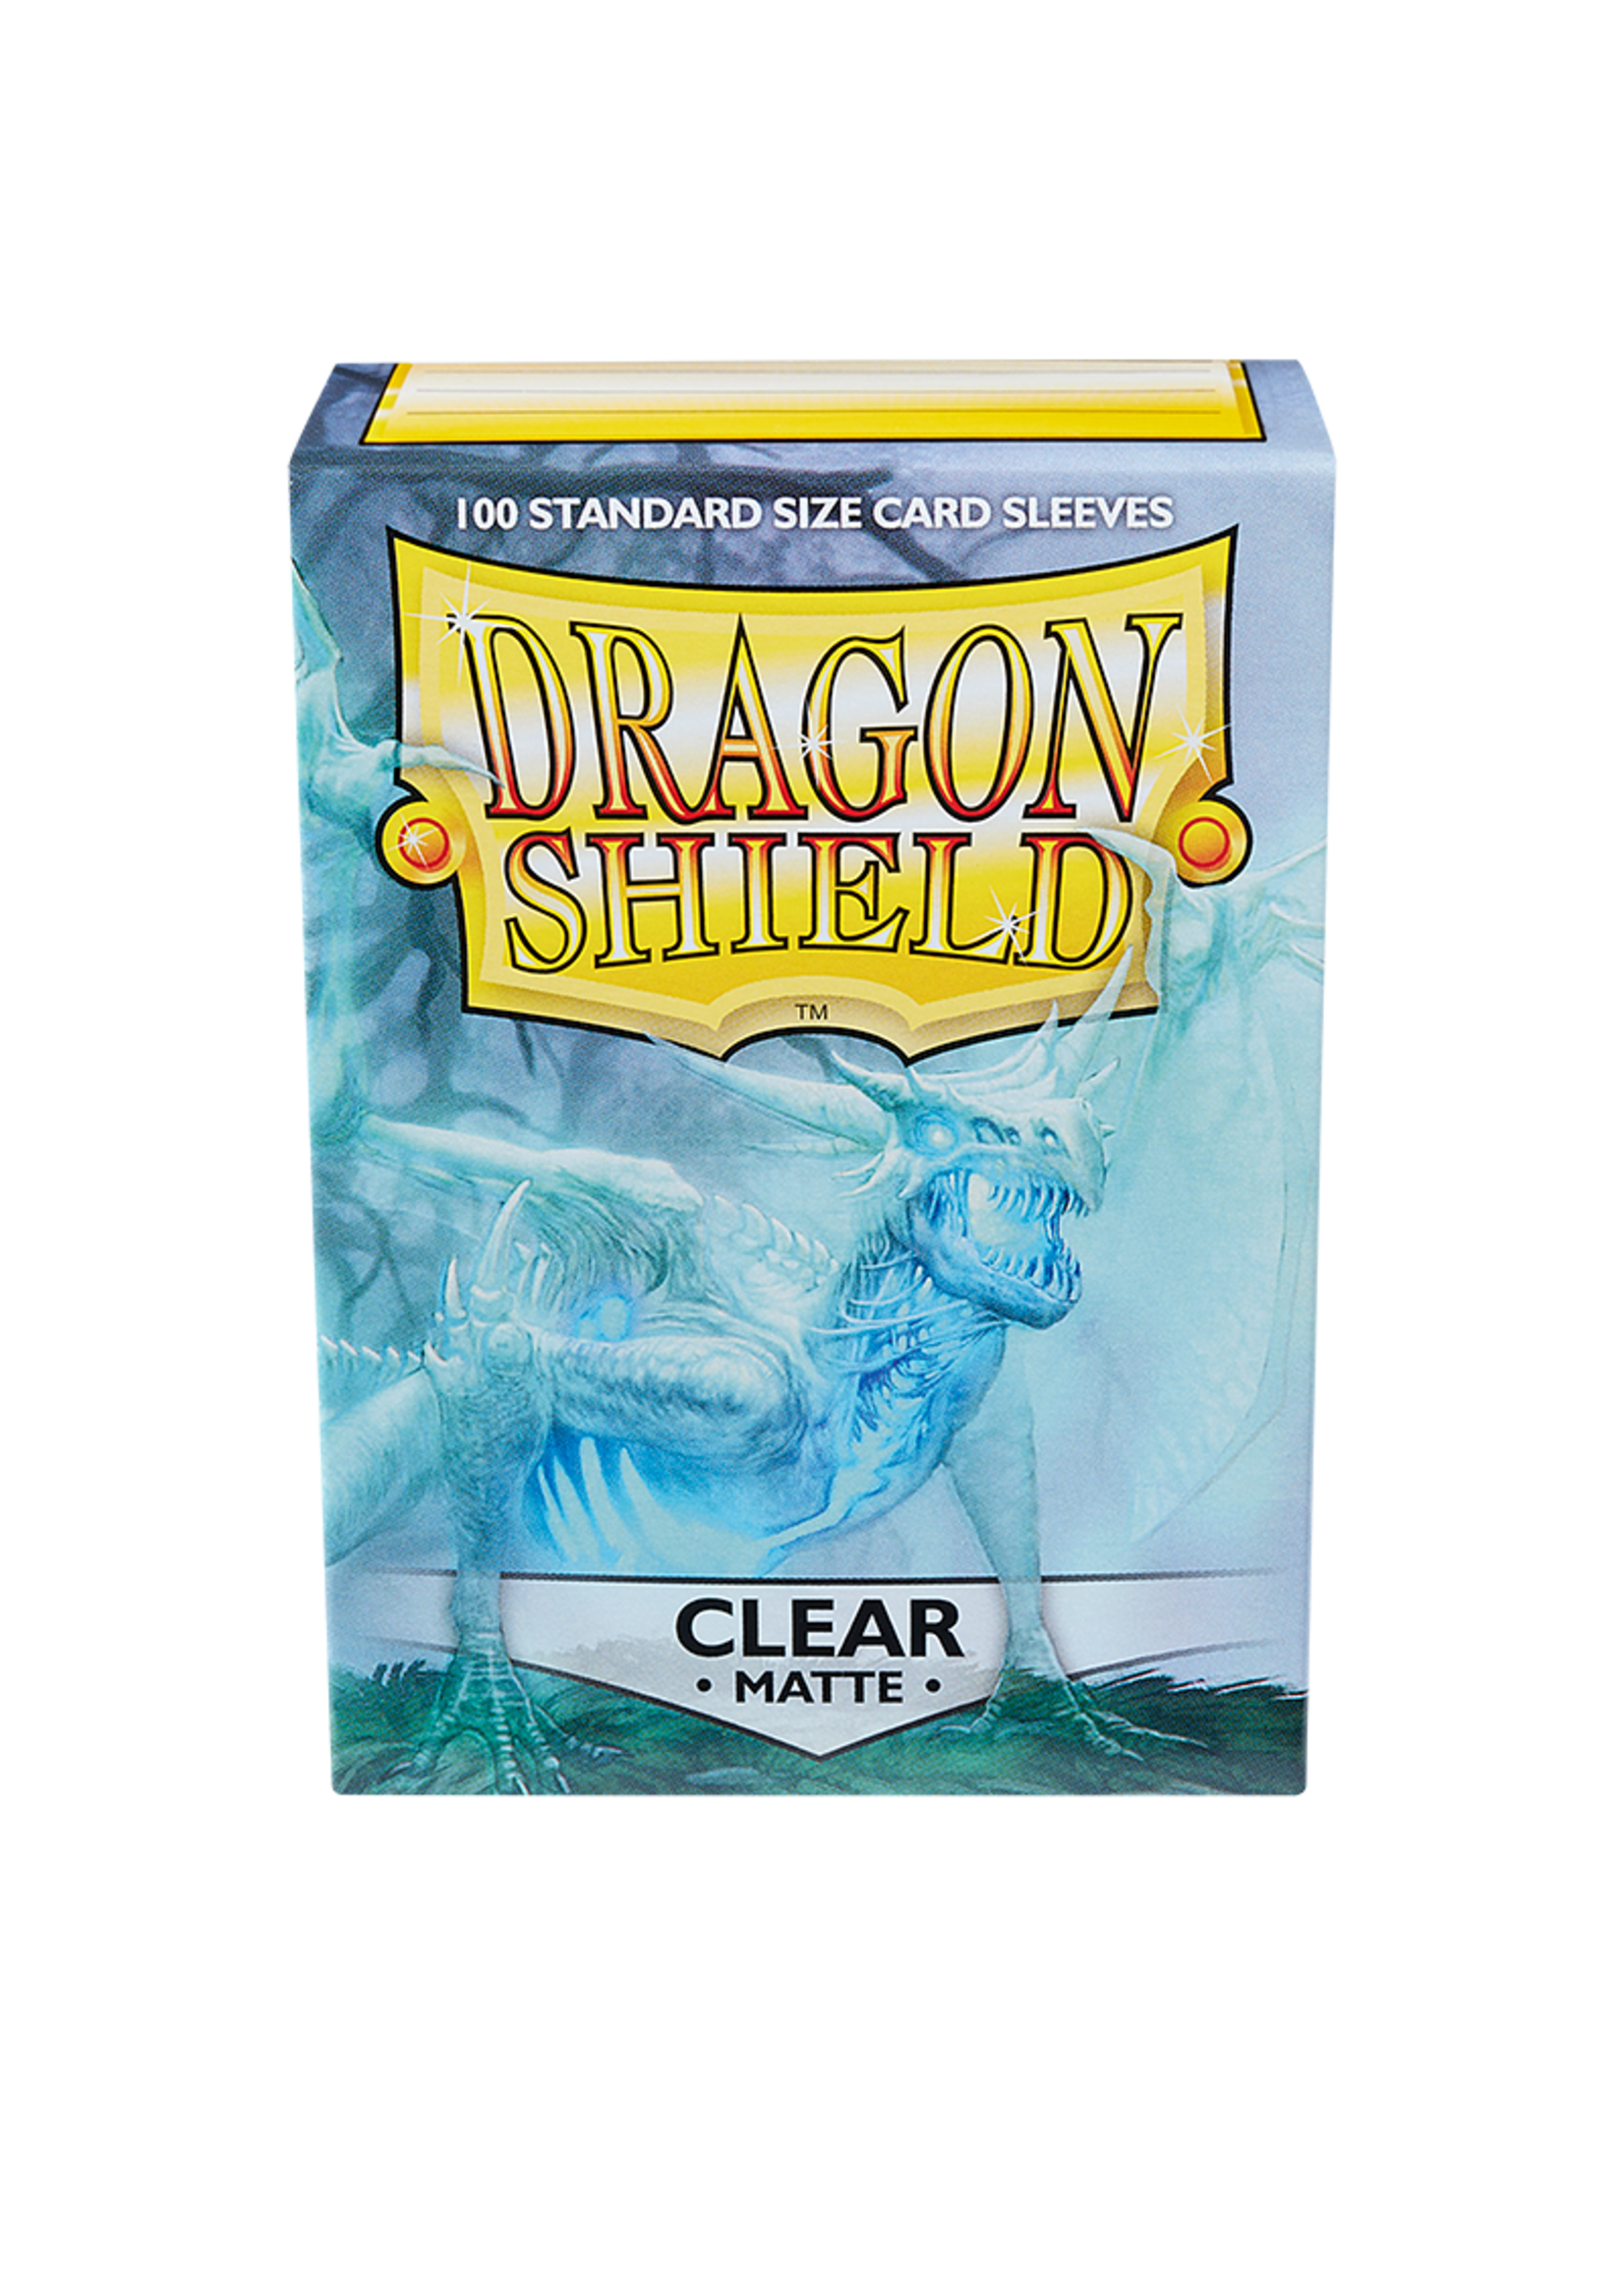 Dragon Shield - Clear Perfect Fit — Card Board Gaming